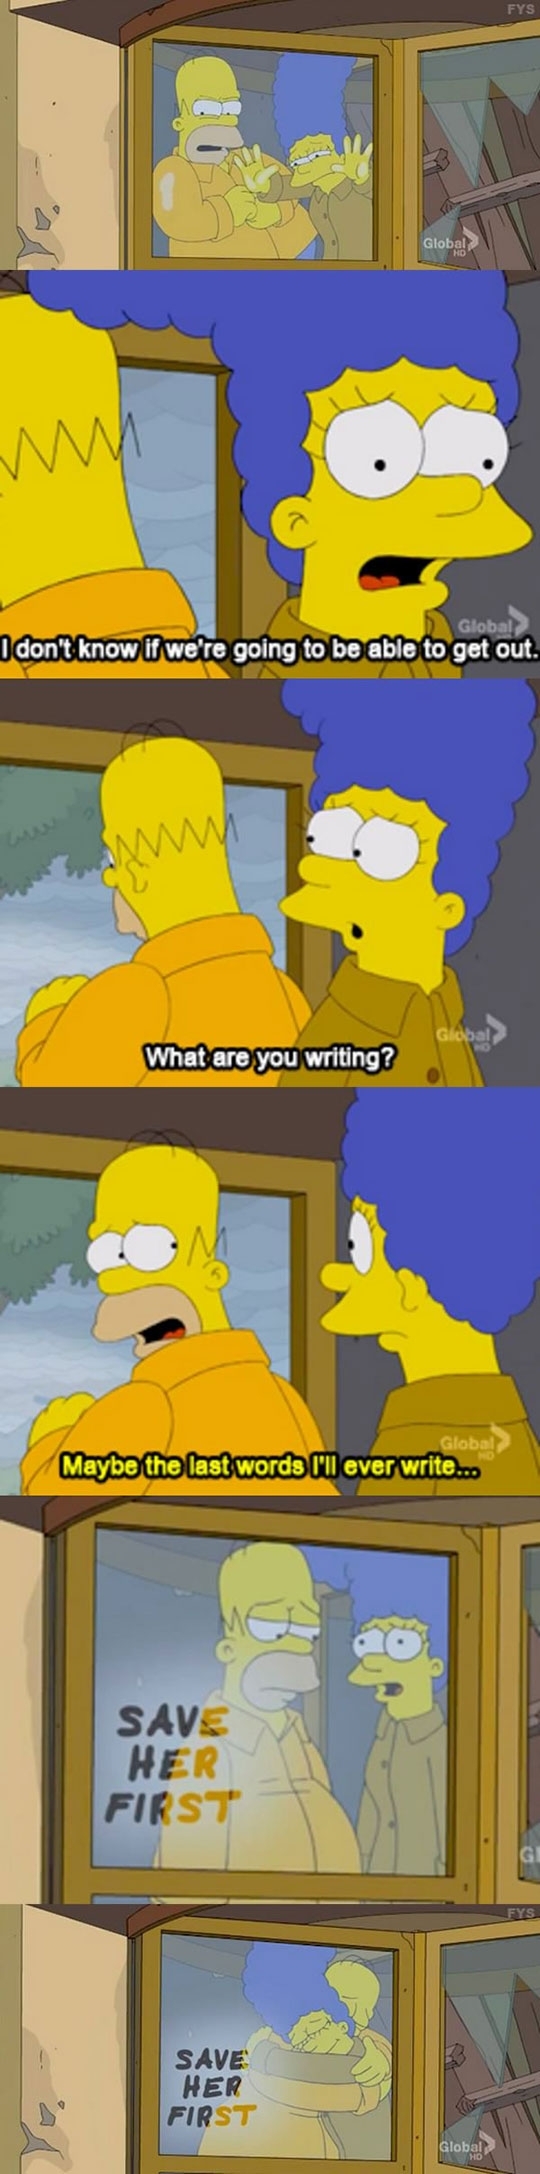 I love the few glimpses you get into the real Homer